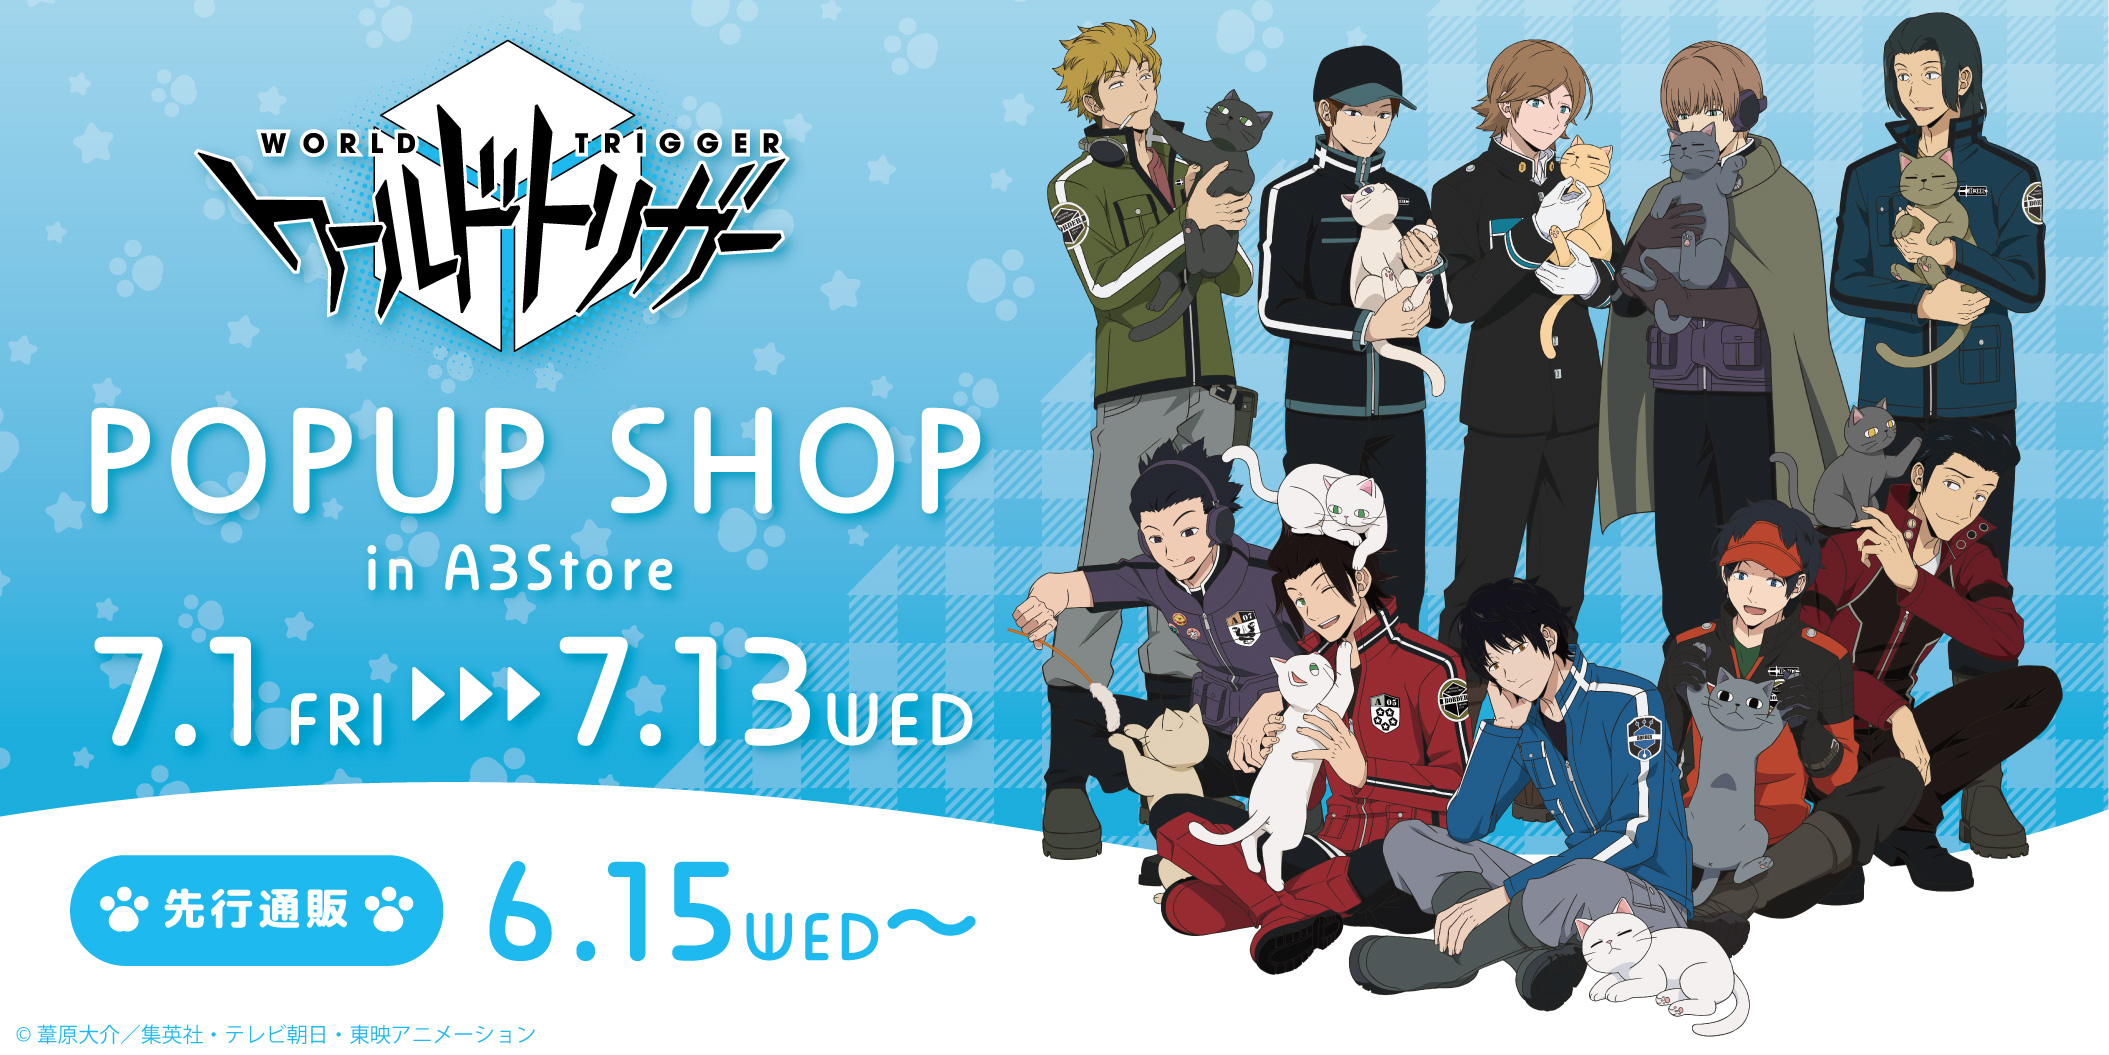 TVアニメ「ワールドトリガー」POPUP SHOP in A3Store